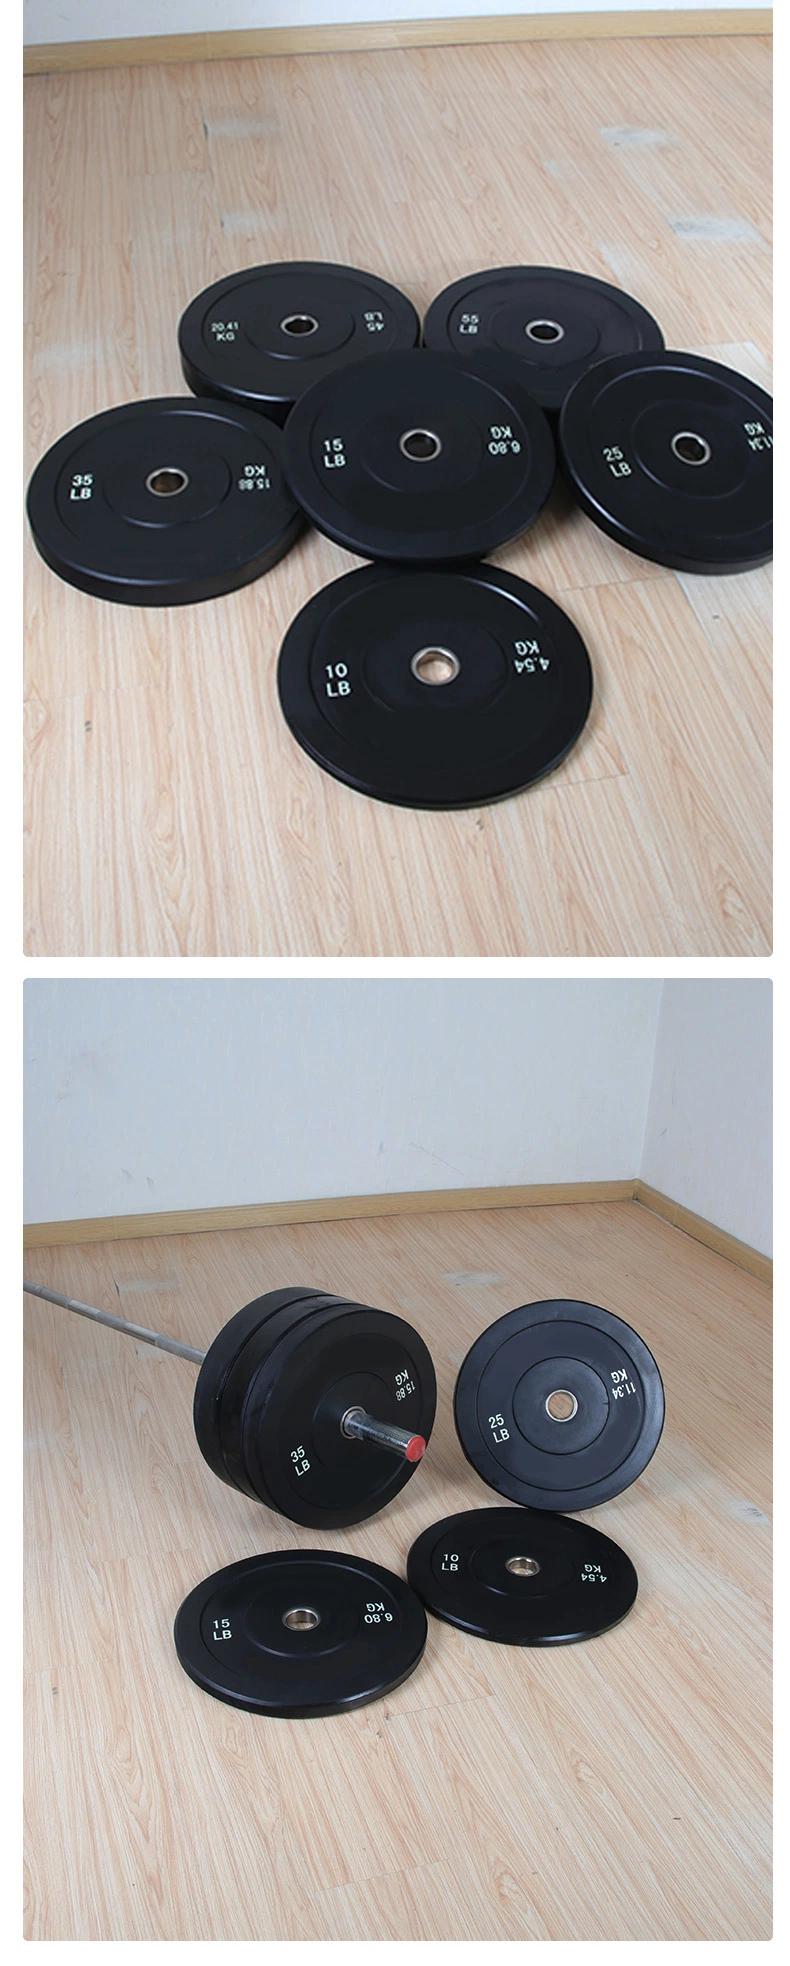 Wholesale Gym Weight Lifting Rubber Bumper Plates Standard Black 2 Inch Lbs Kg Barbell Fitness Training Equipment Weight Plate 20kg